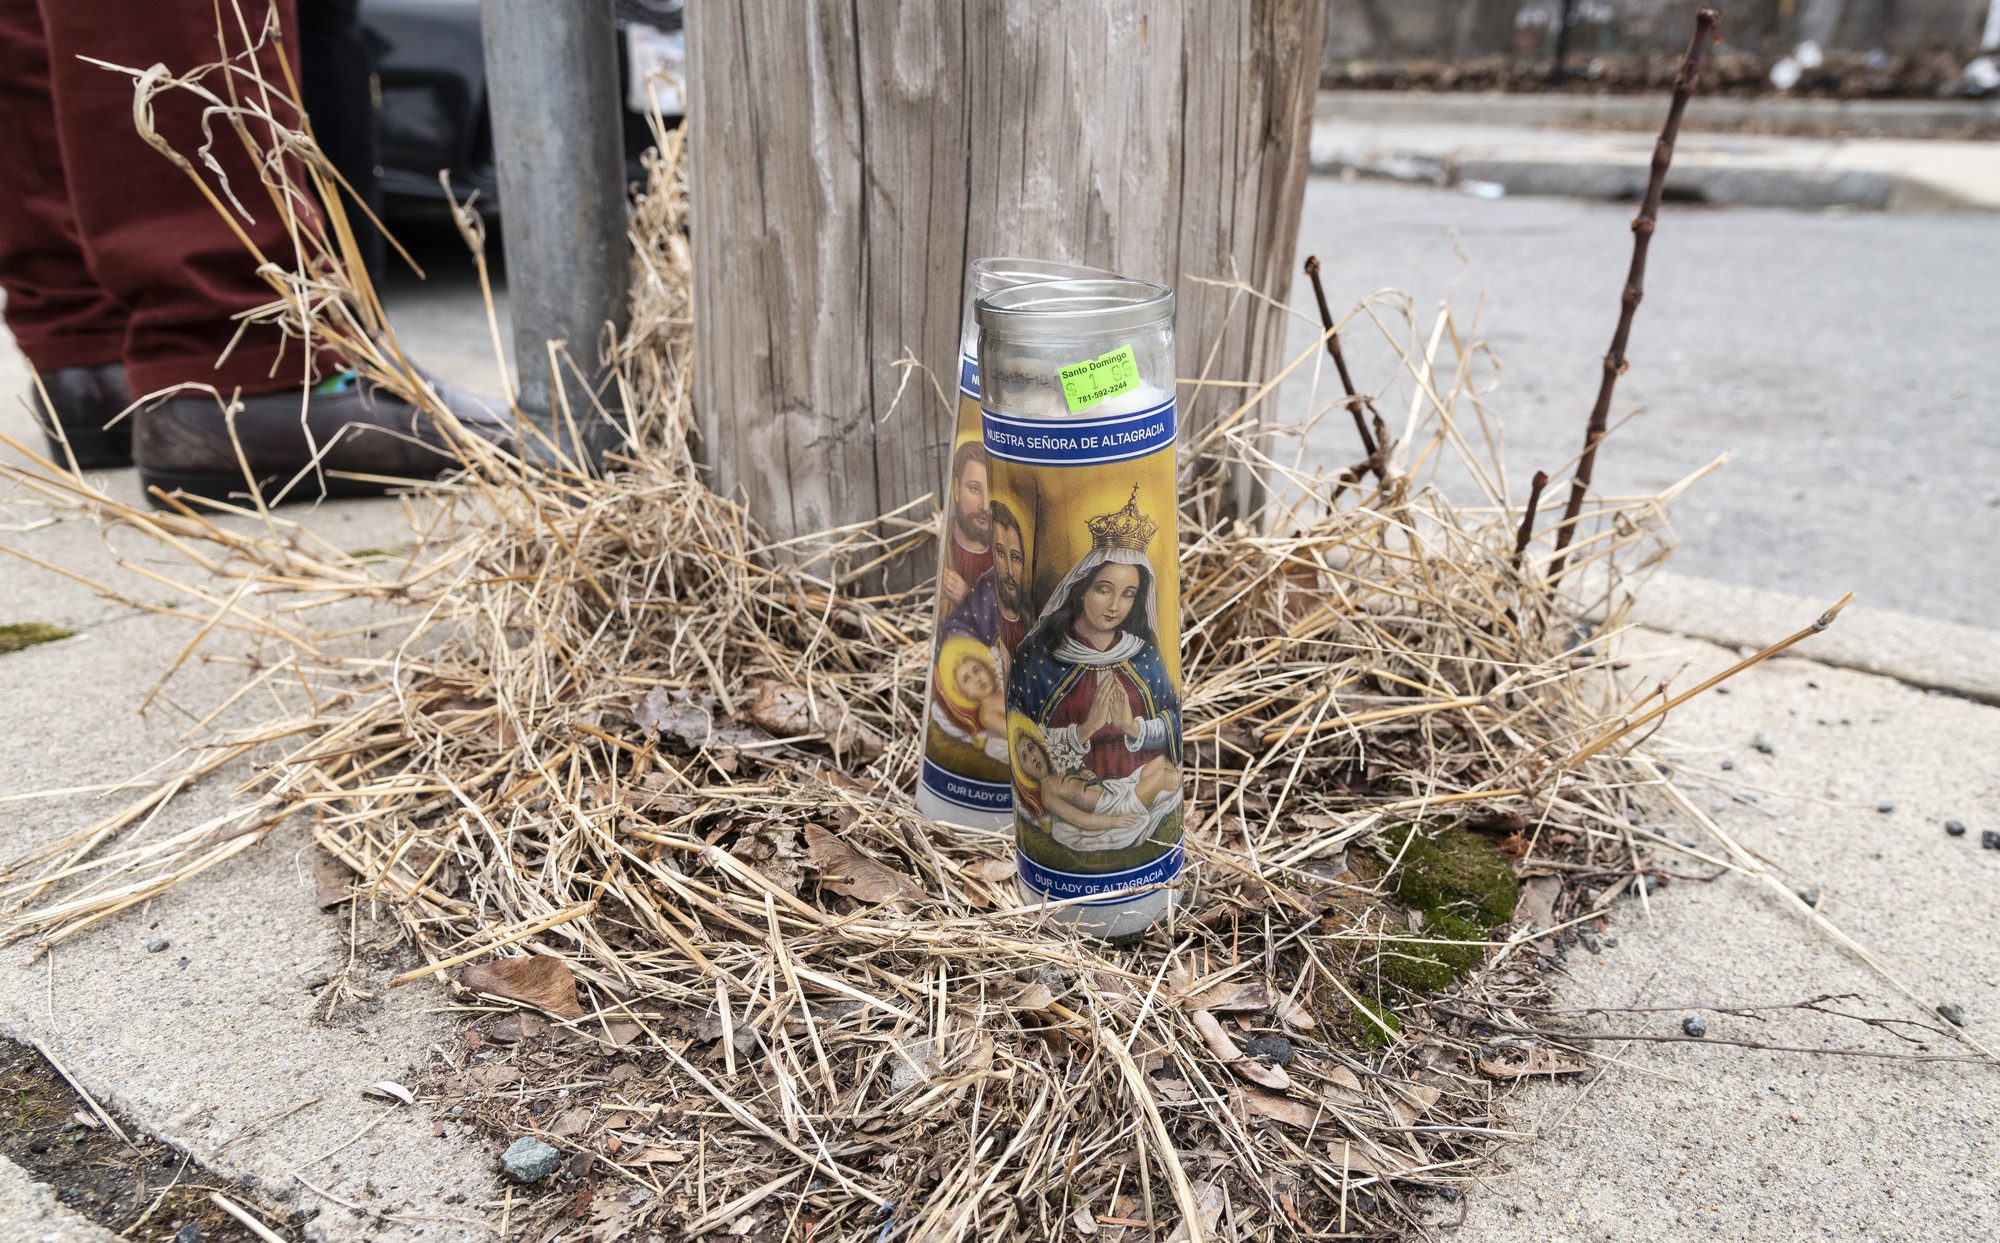 Prayer candles rest at the base of a telephone pole on Williams Avenue in Lynn where Anthony Betancourt was shot and killed early Wednesday morning.